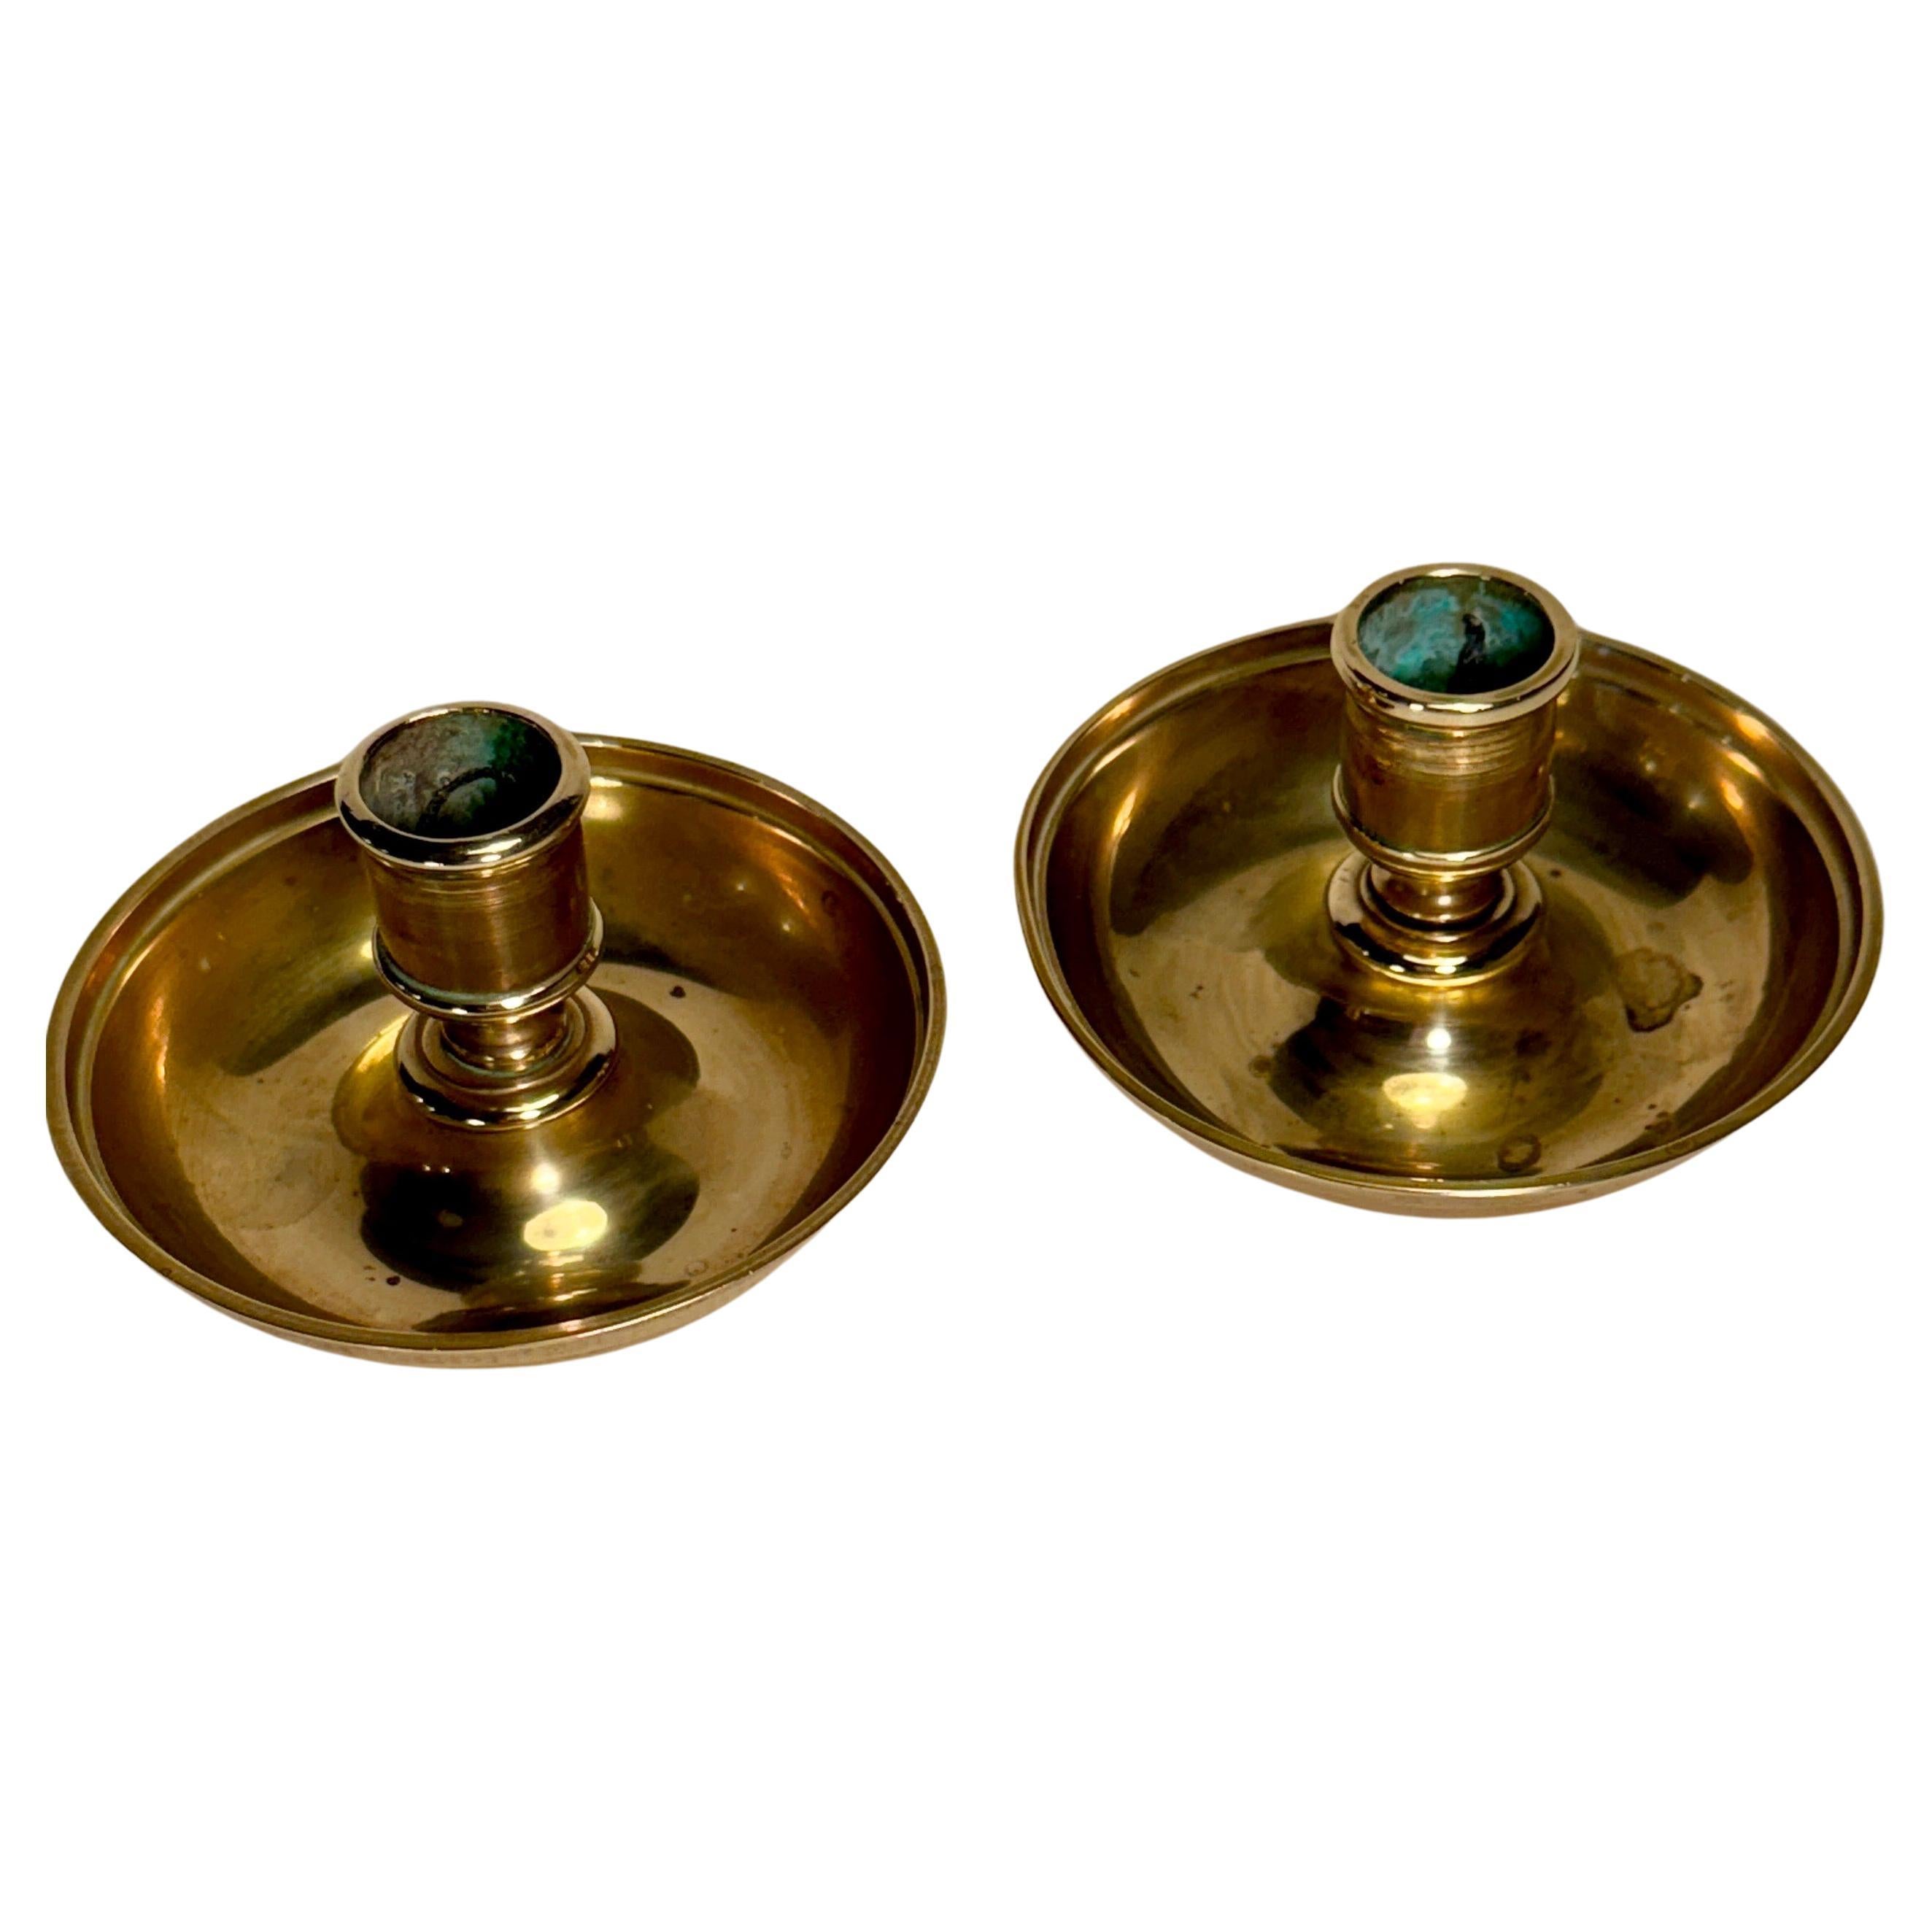 Hand-Crafted Early 19th Century Set of Brass Travel Candlesticks Chamber-stands For Sale